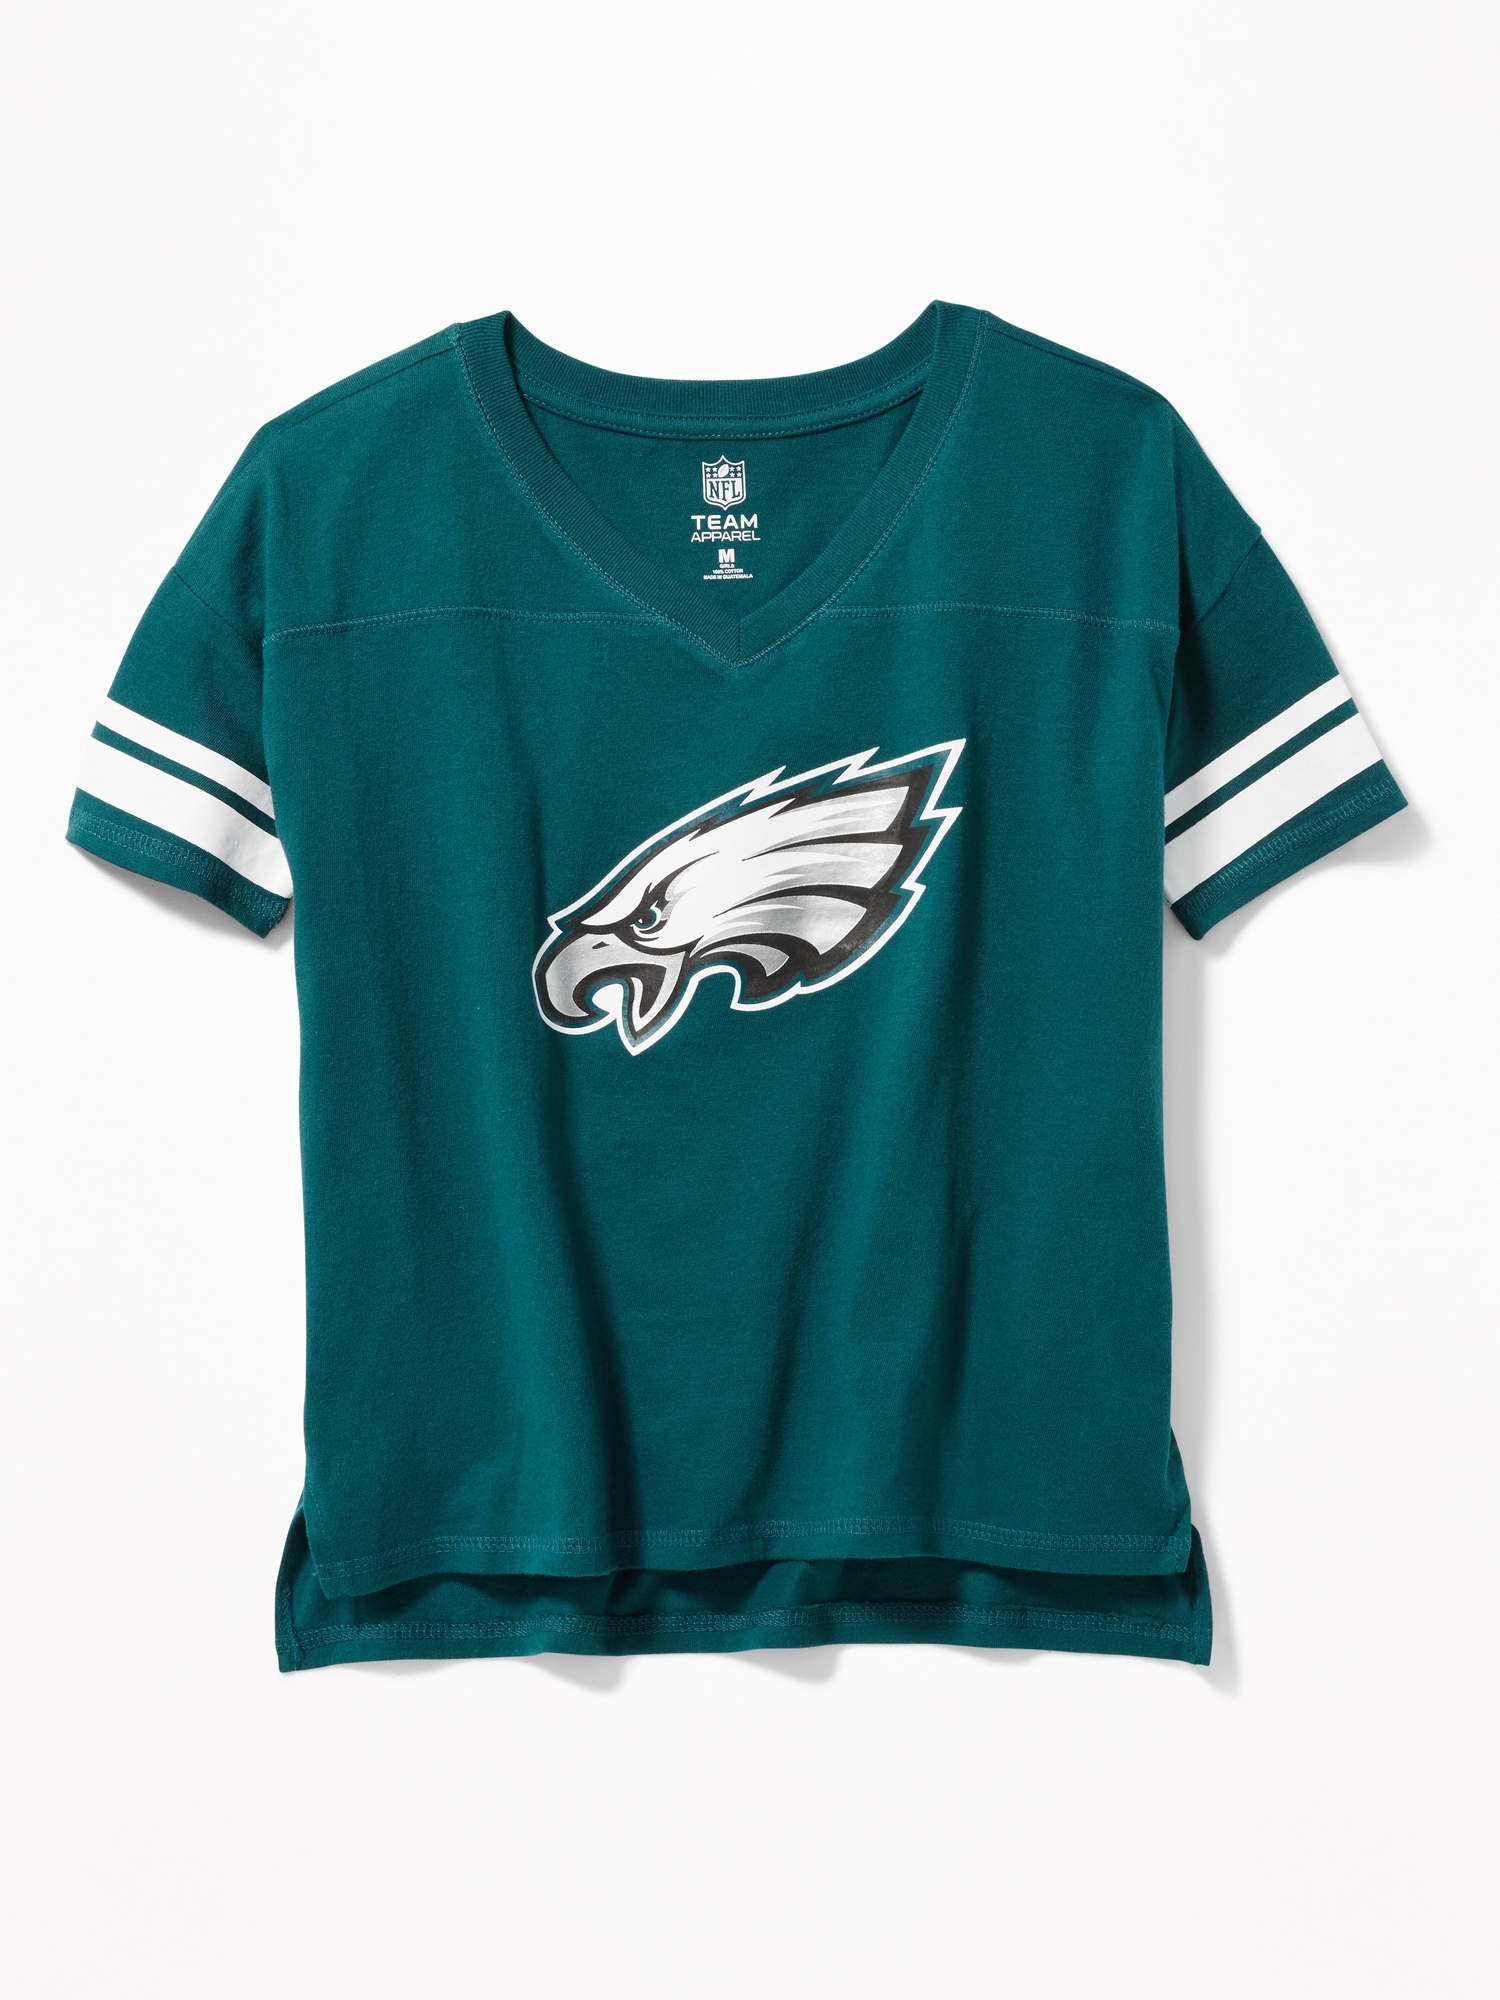 NFL&174 Team-Mascot Graphic Tee for Girls | Old Navy